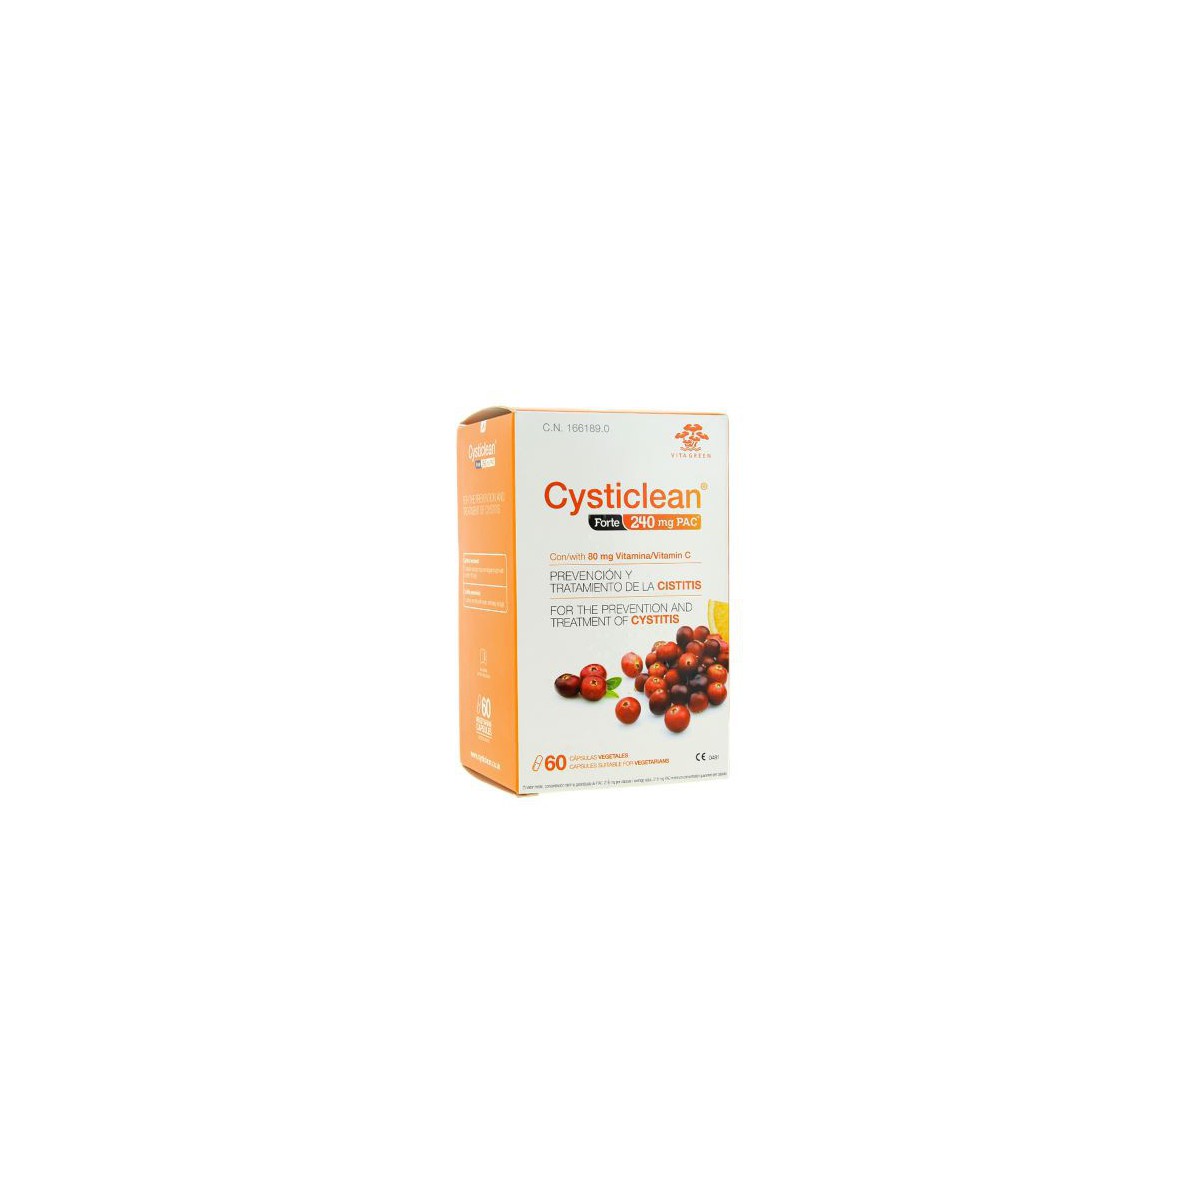 CYSTICLEAN FORTE 240MG